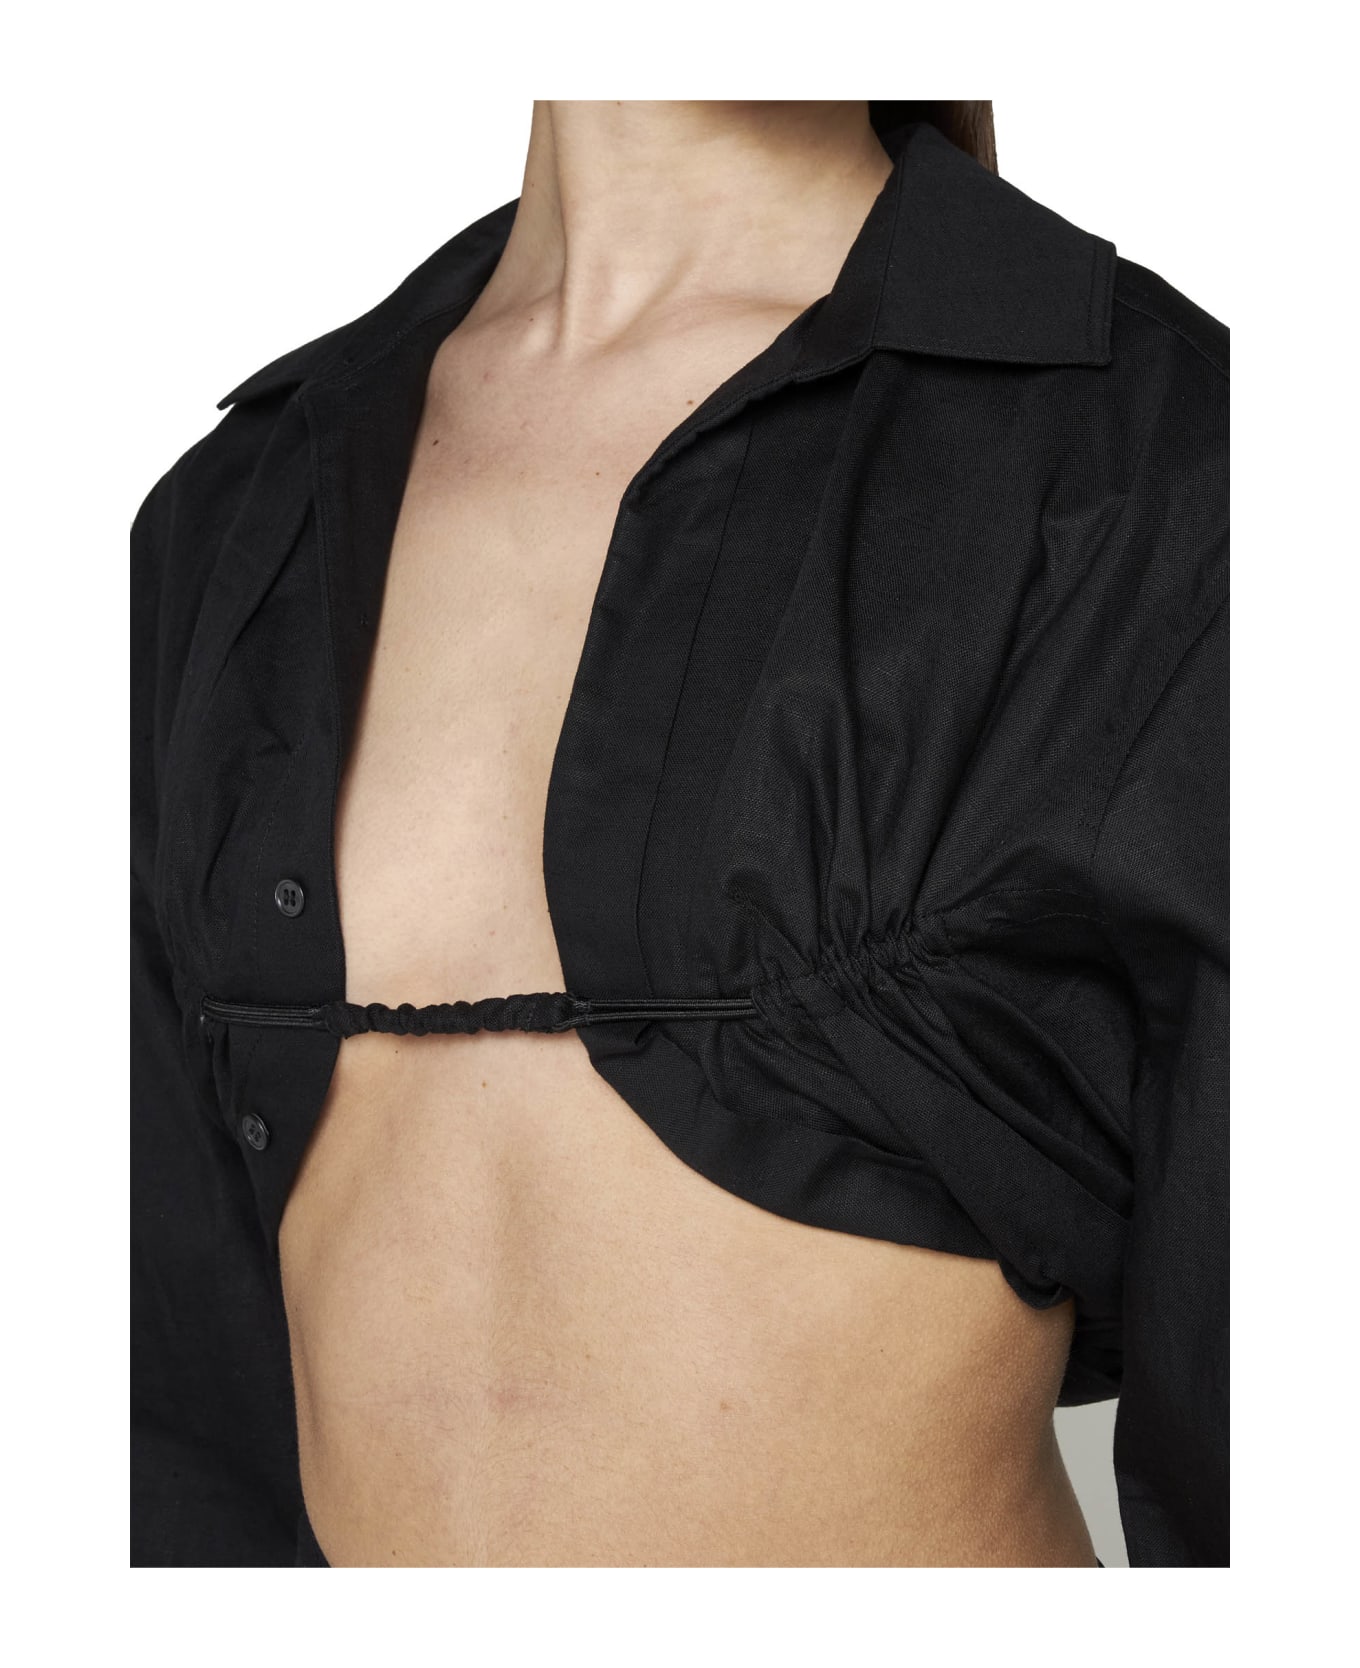 Jacquemus 'le Chemise Machou' Black Gathered Cropped Shirt In Cotton And Linen Woman Jacquemus - Black ジャケット